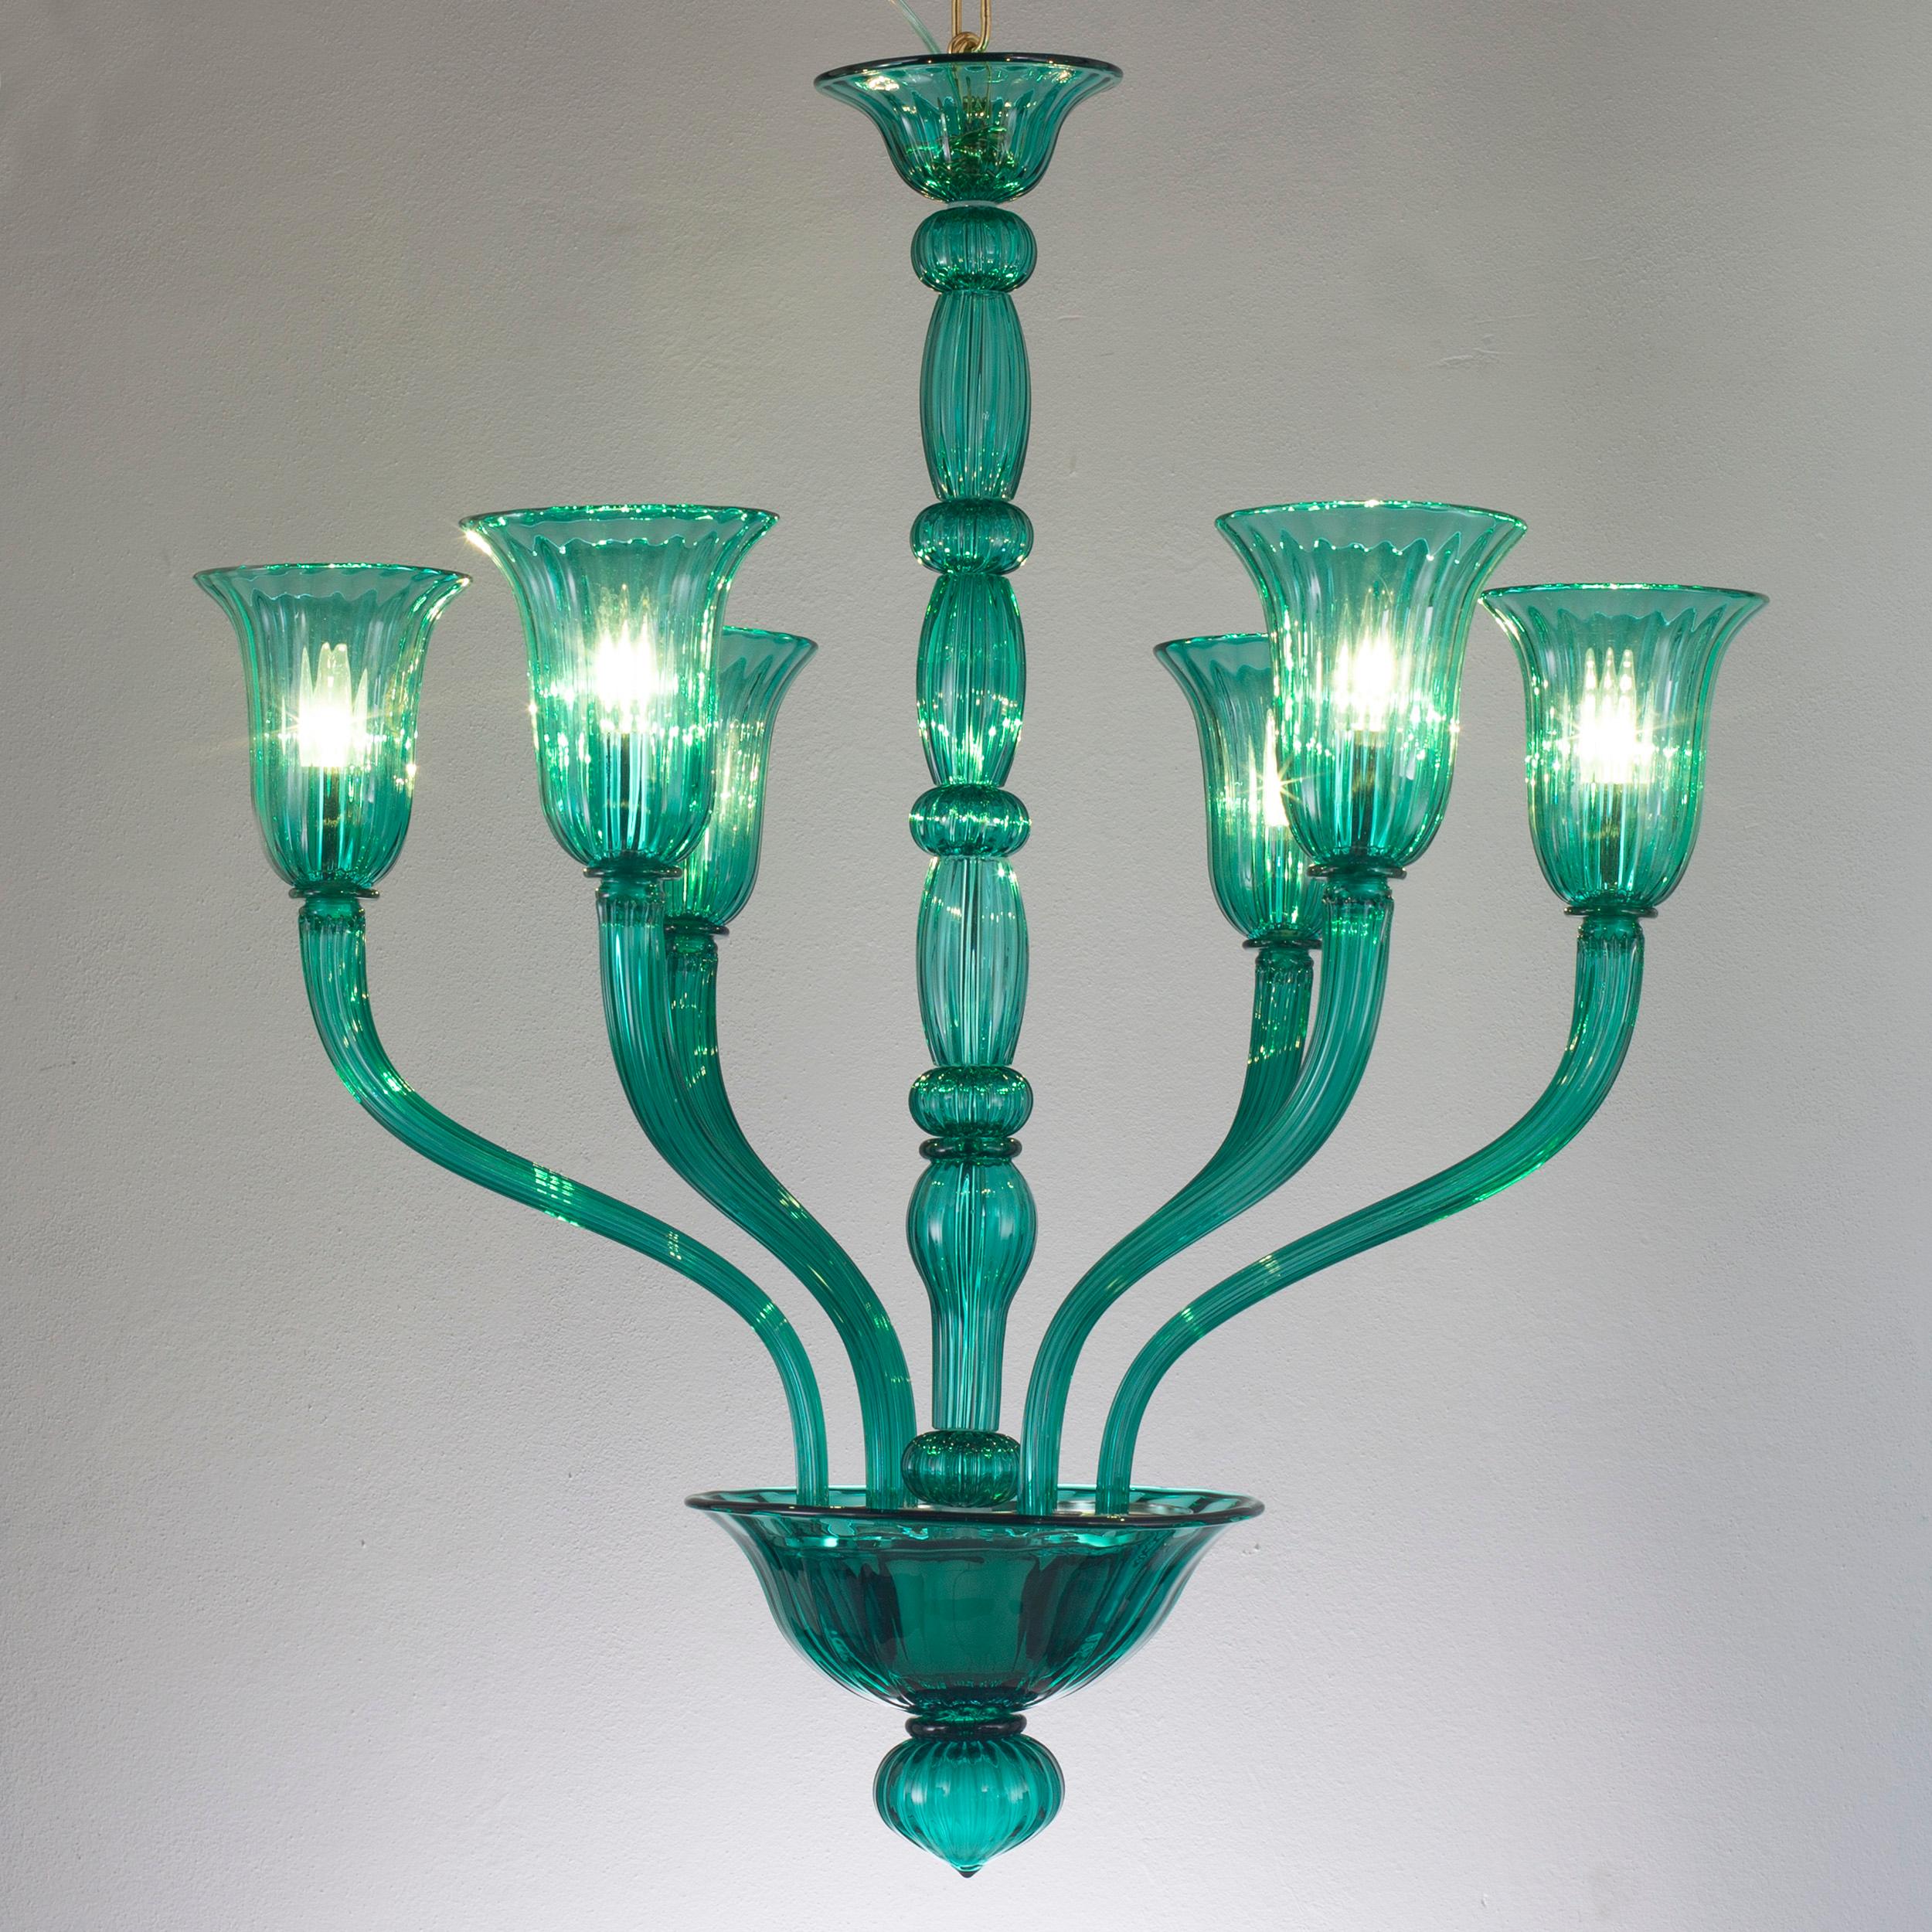 Modern chandelier 6 lights. Marine green Murano glass with climbing arms by Multiforme.

The blown glass of this Venetian chandelier is inspired from the Art Deco style. It is characterized by long arms which are bended upwards and by encased